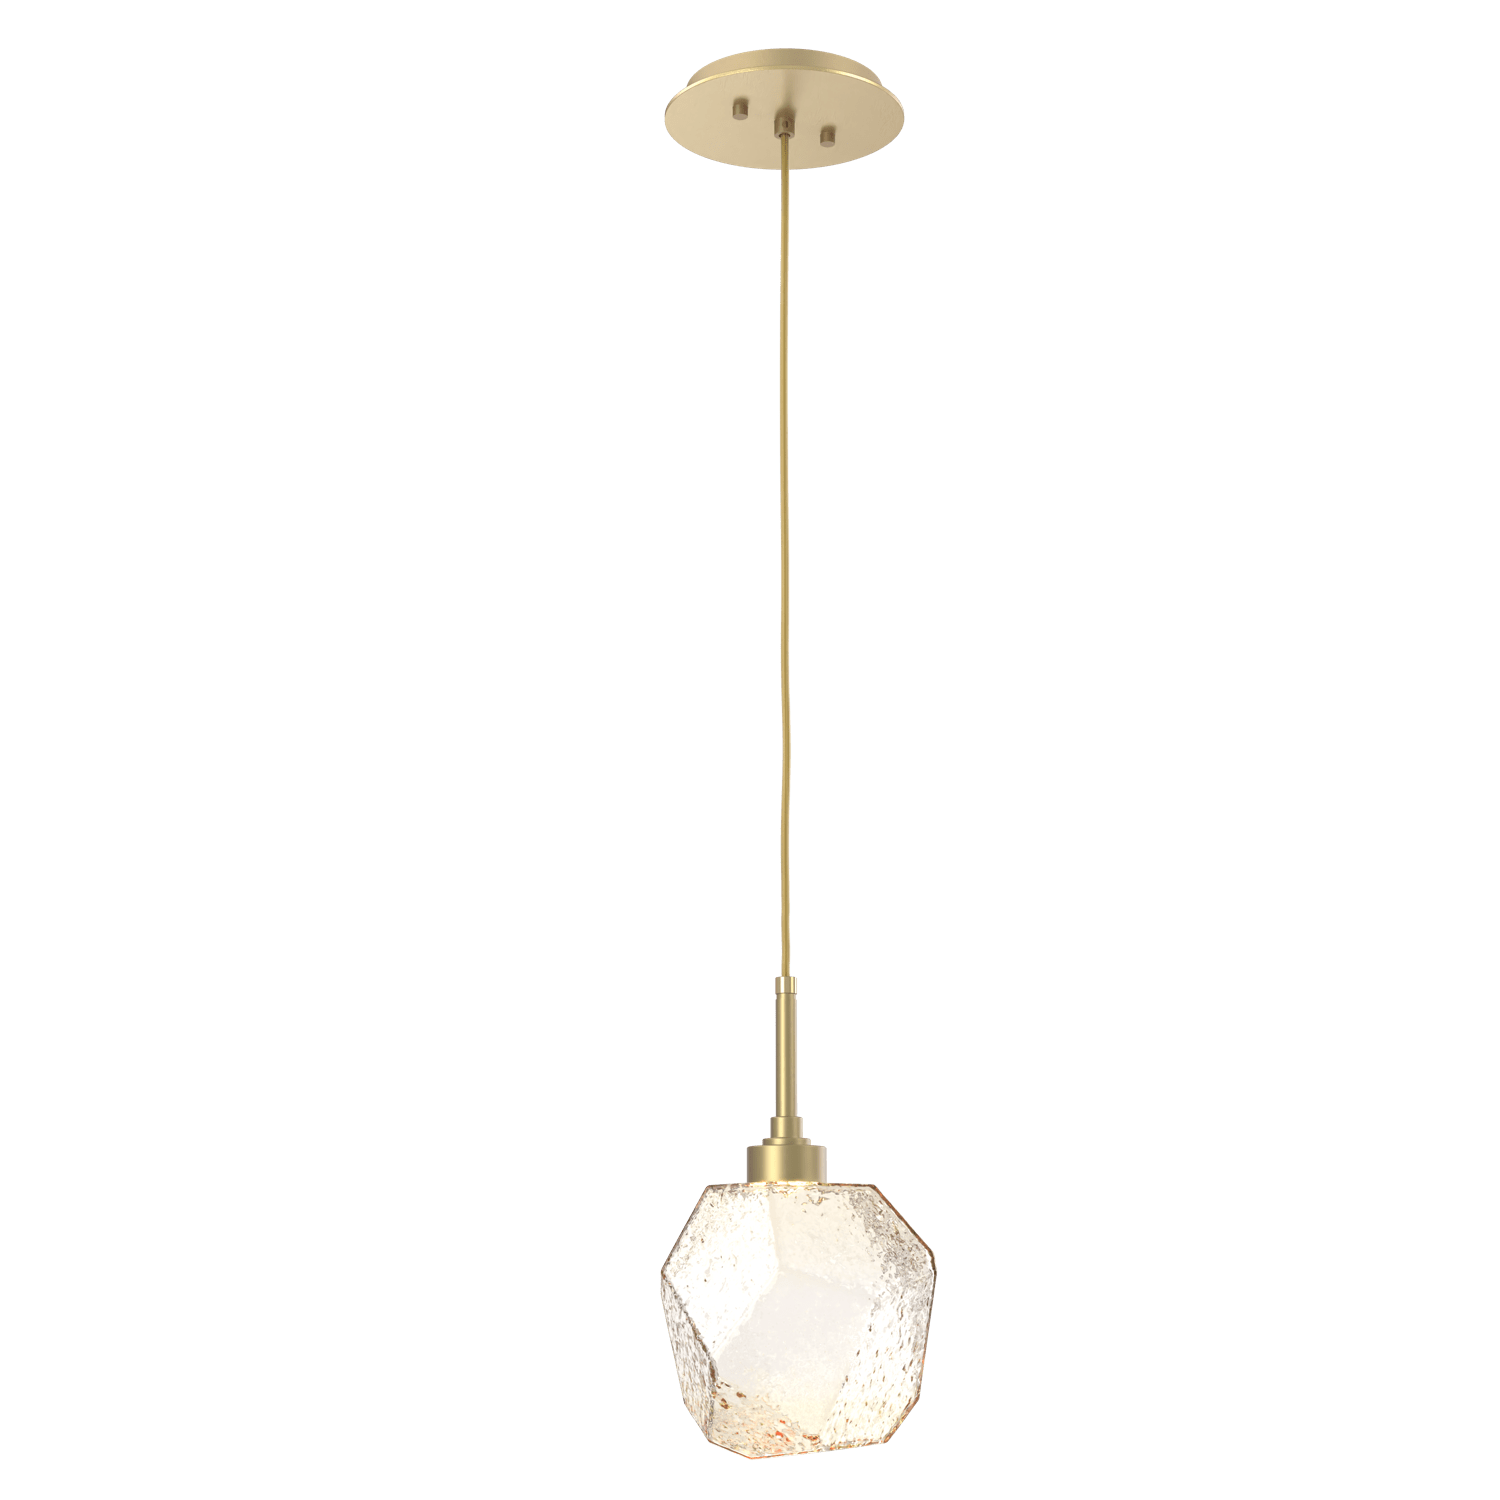 LAB0039-01-GB-A-Hammerton-Studio-Gem-pendant-light-with-gilded-brass-finish-and-amber-blown-glass-shades-and-LED-lamping